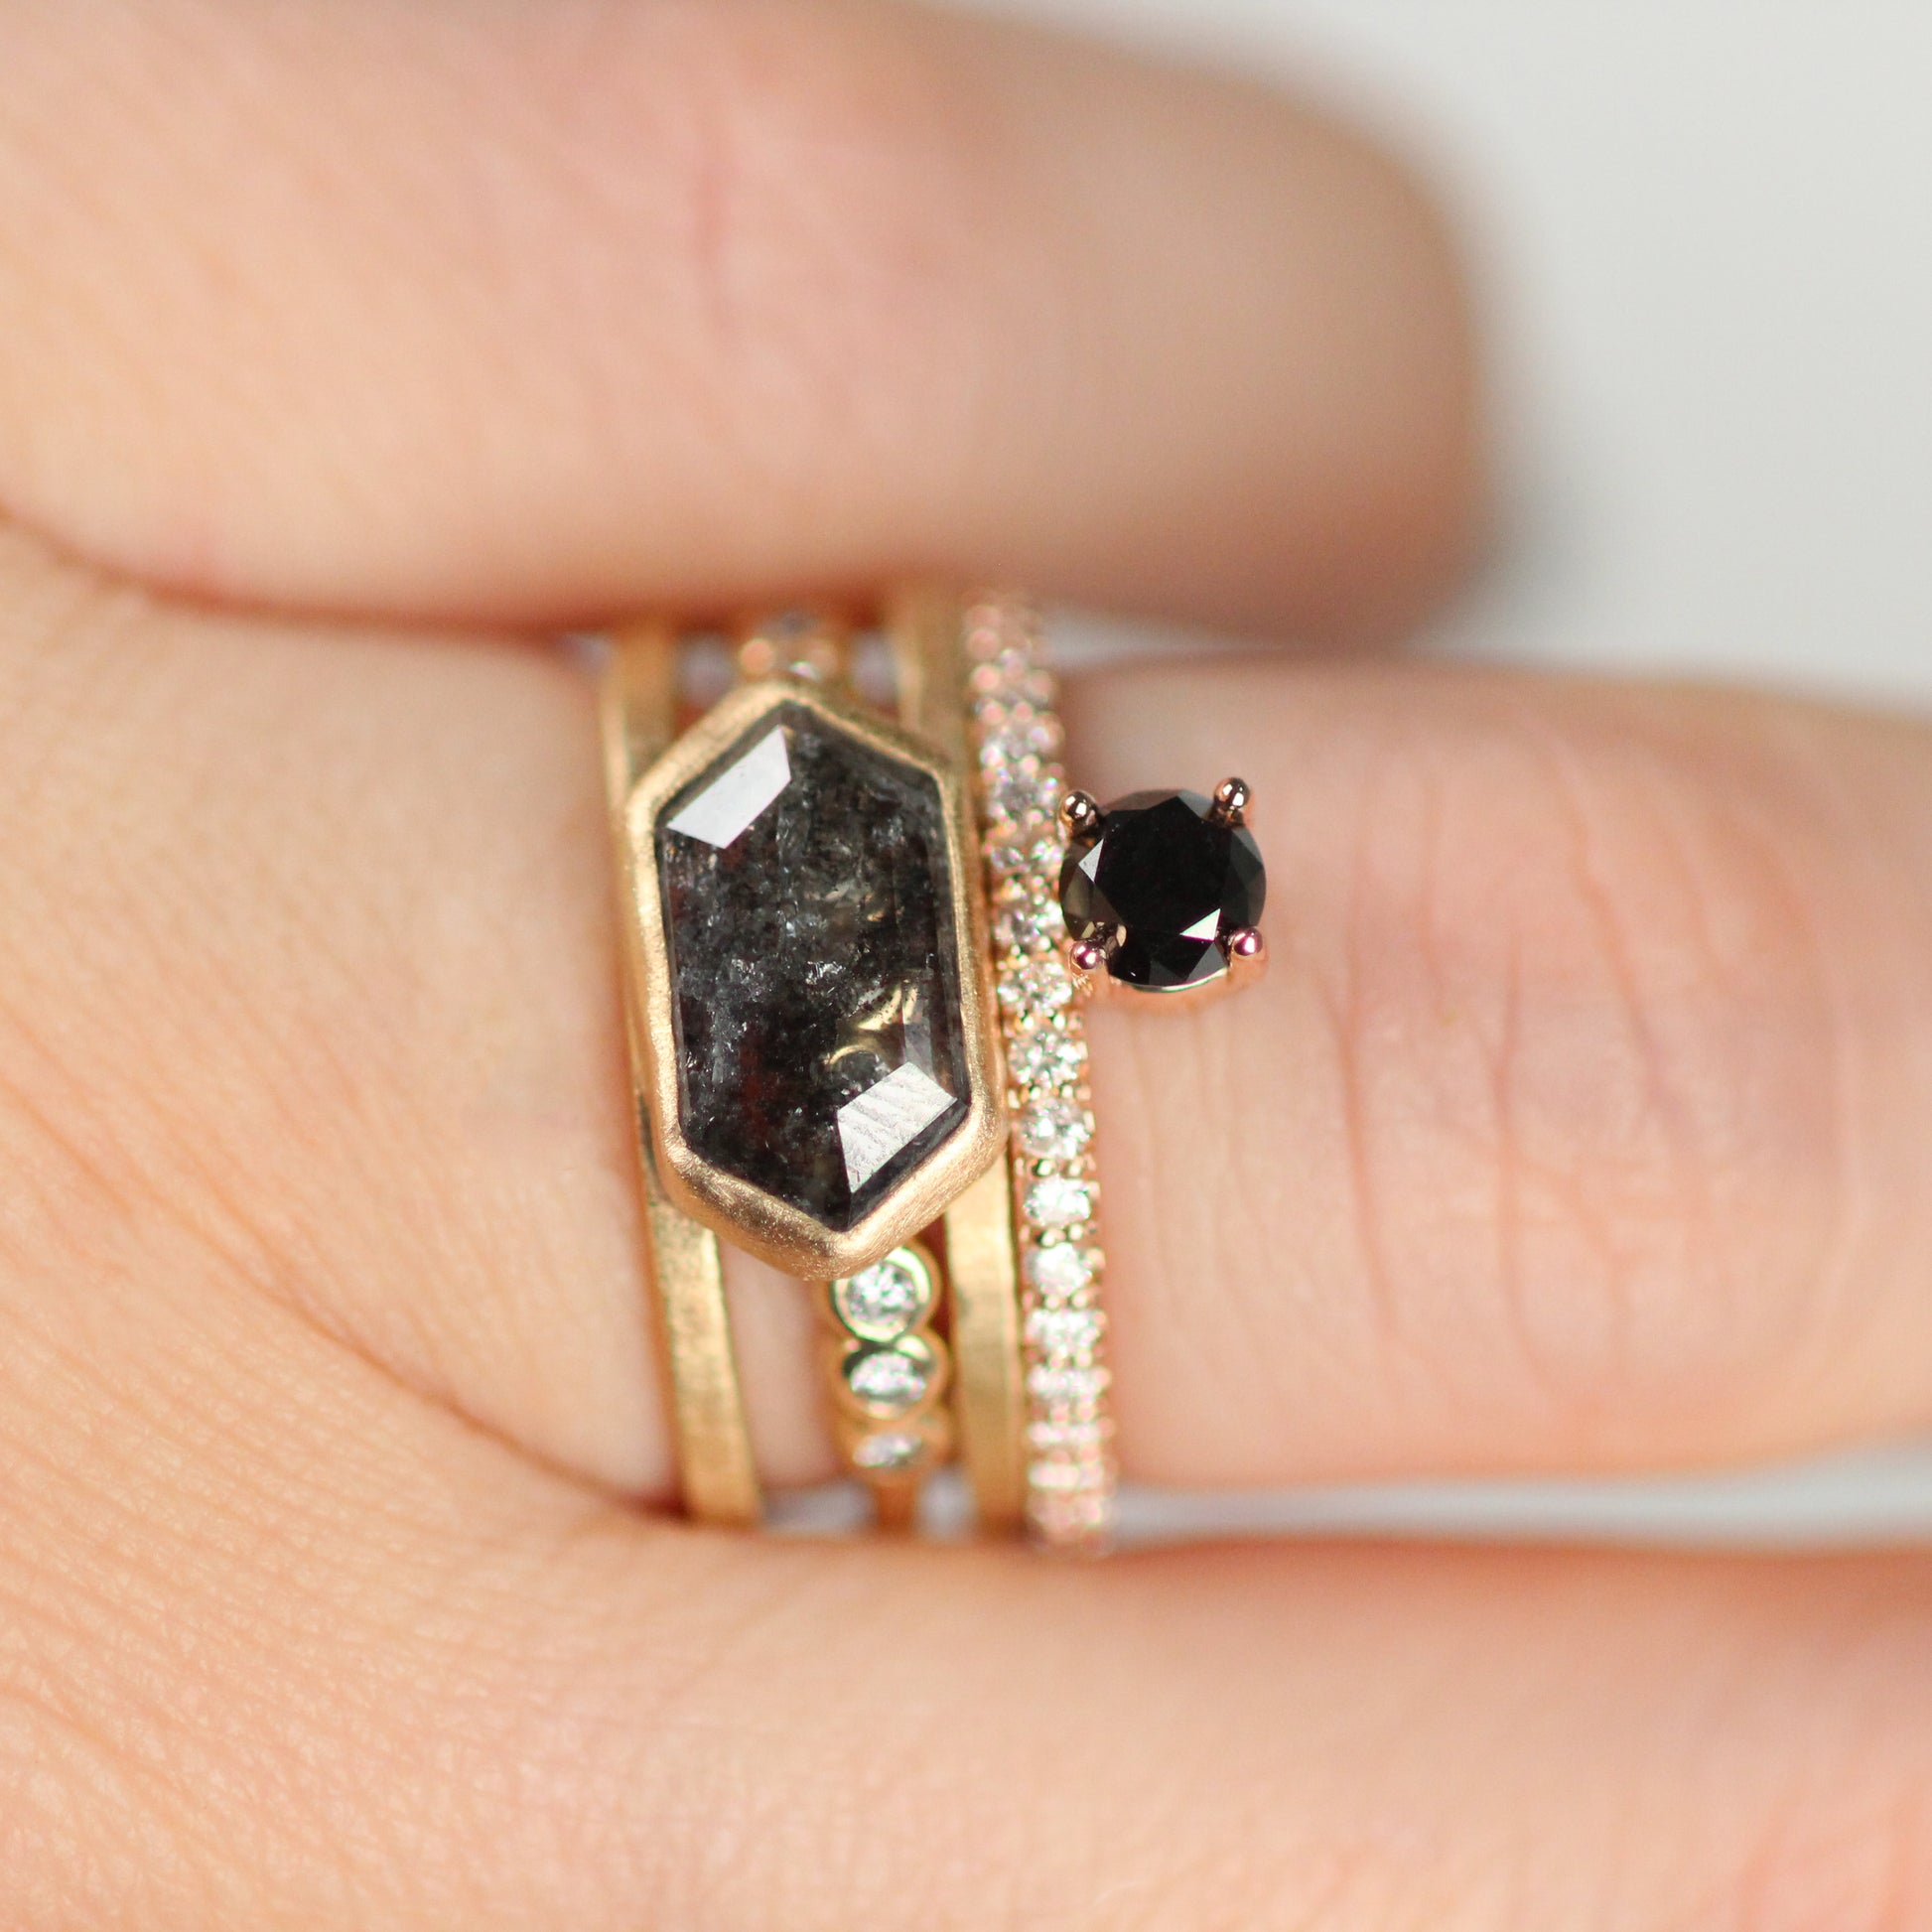 Gray or Black and White Nellie Minimal Ring - Asymmetrical Diamond Band Ring in Gold - Midwinter Co. Alternative Bridal Rings and Modern Fine Jewelry